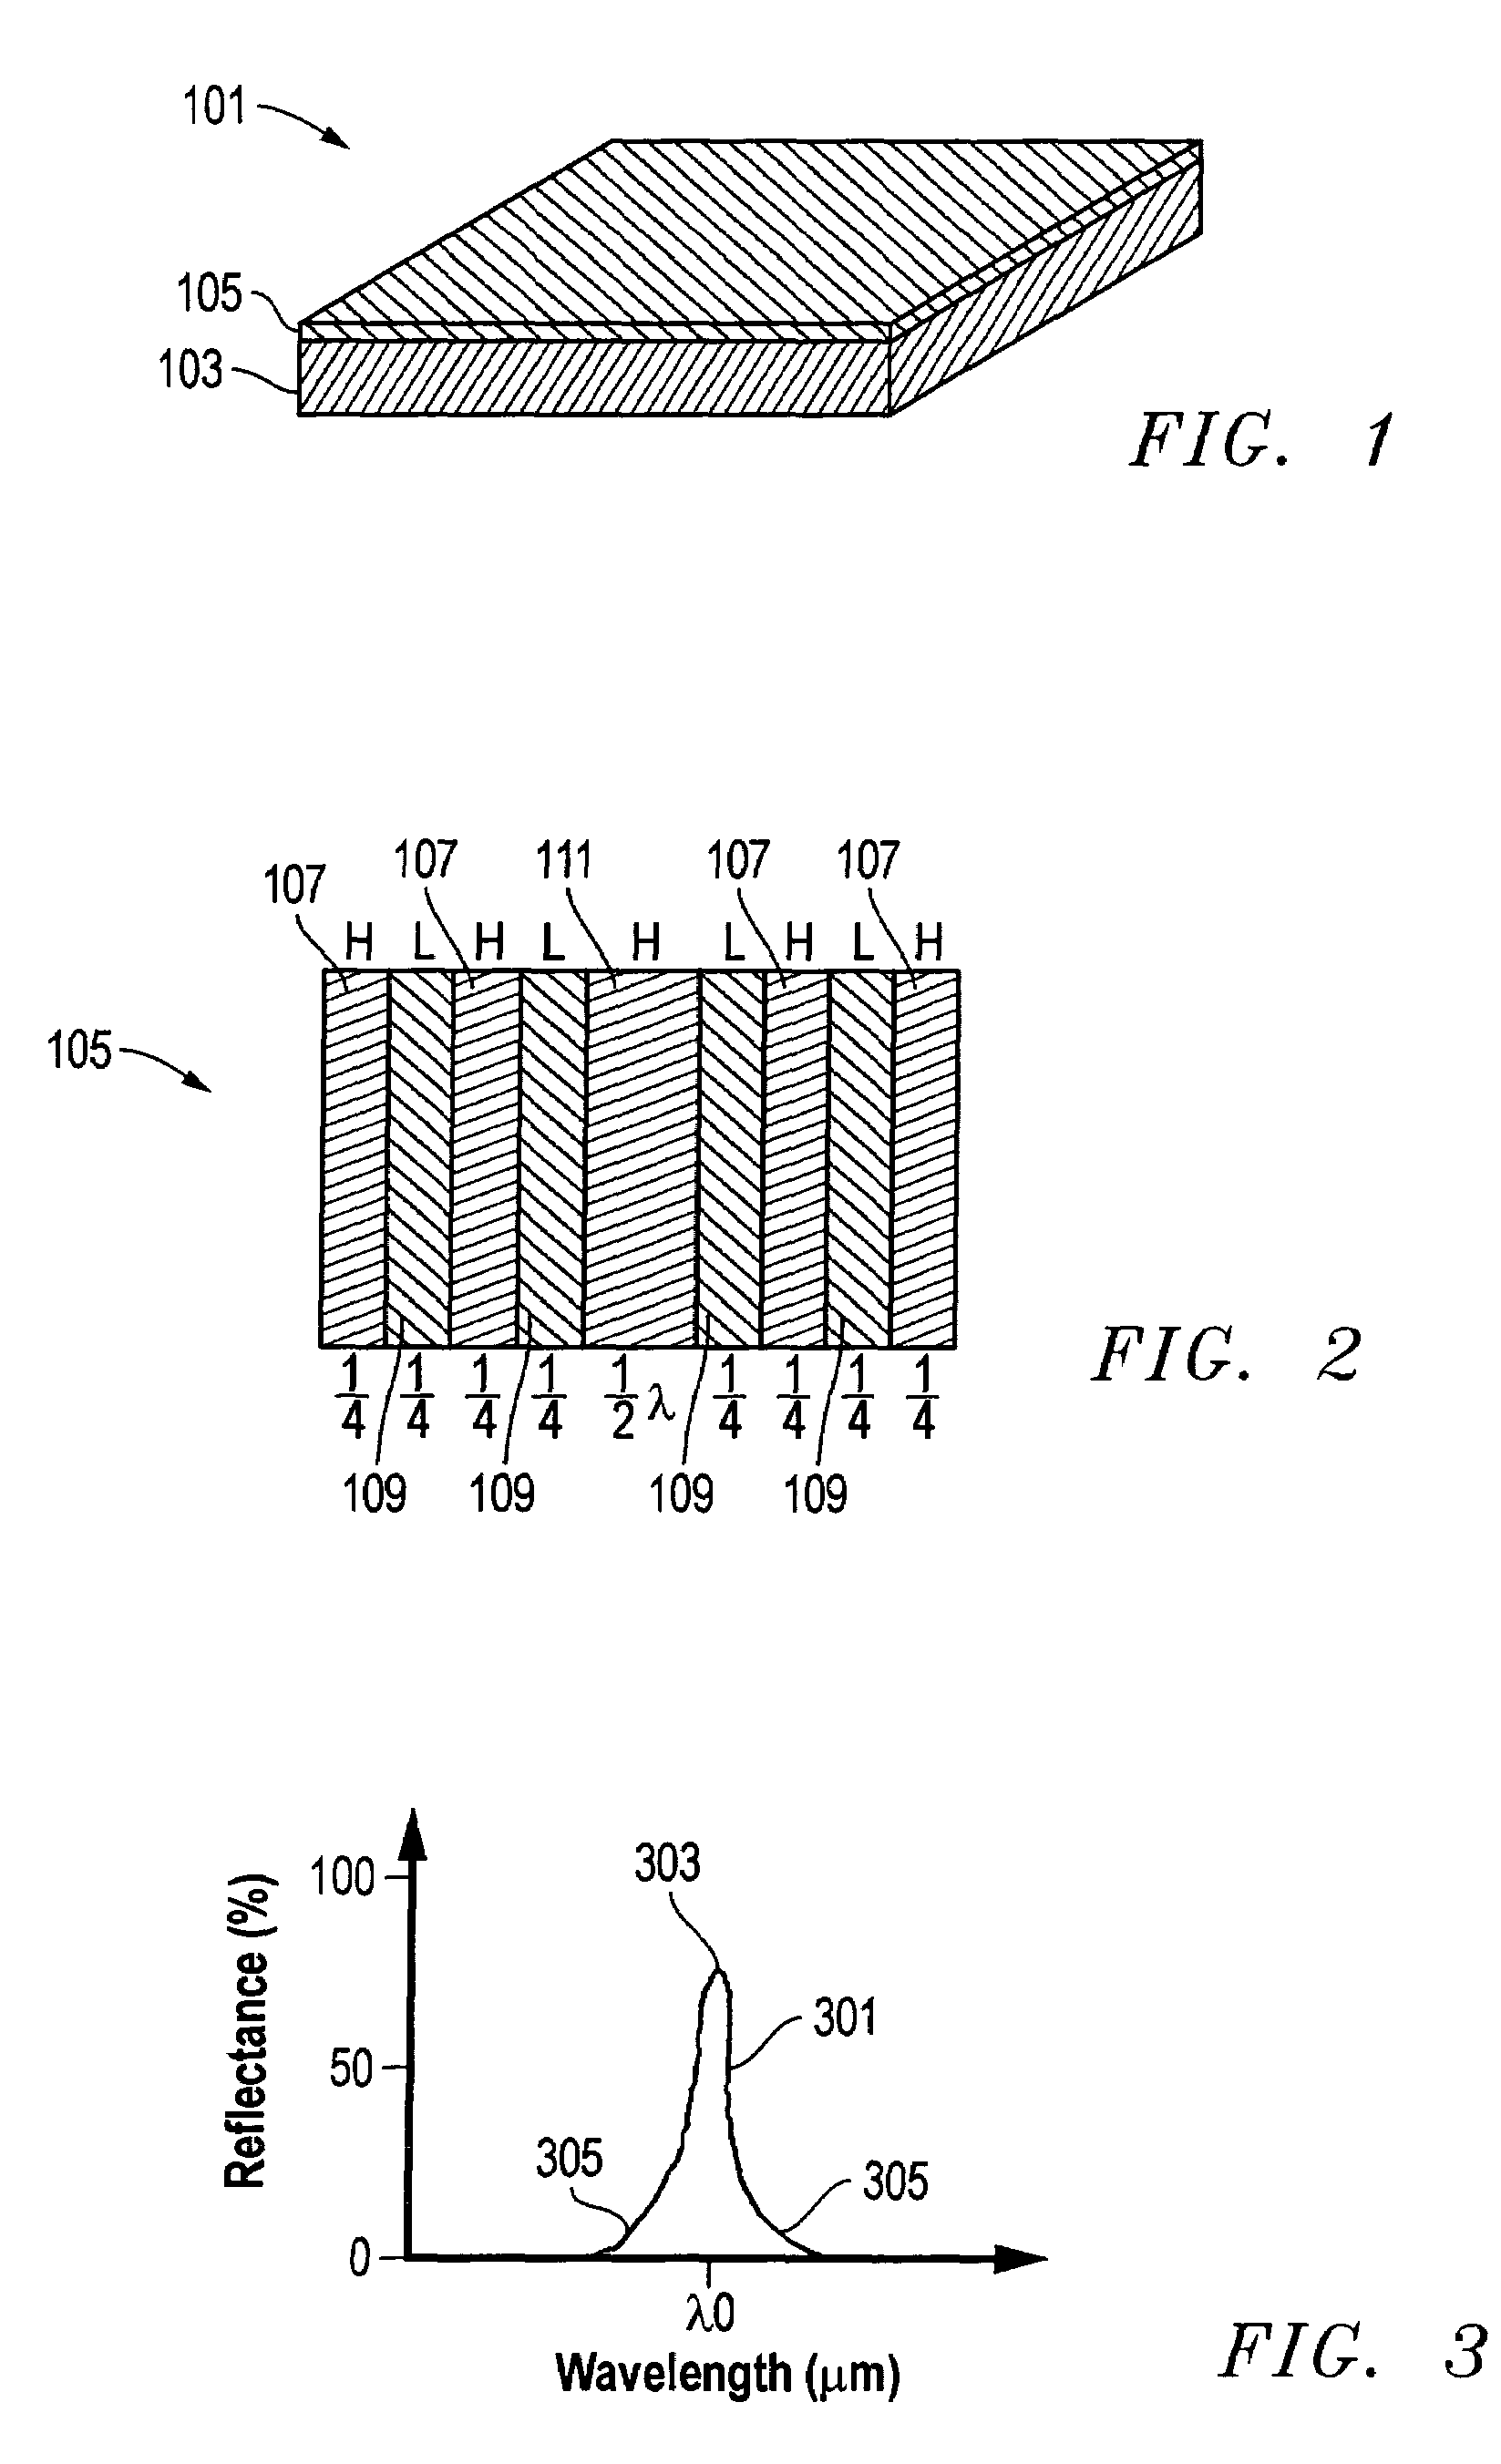 System, method, and apparatus for passive, multi-spectral, optical identification of remote objects